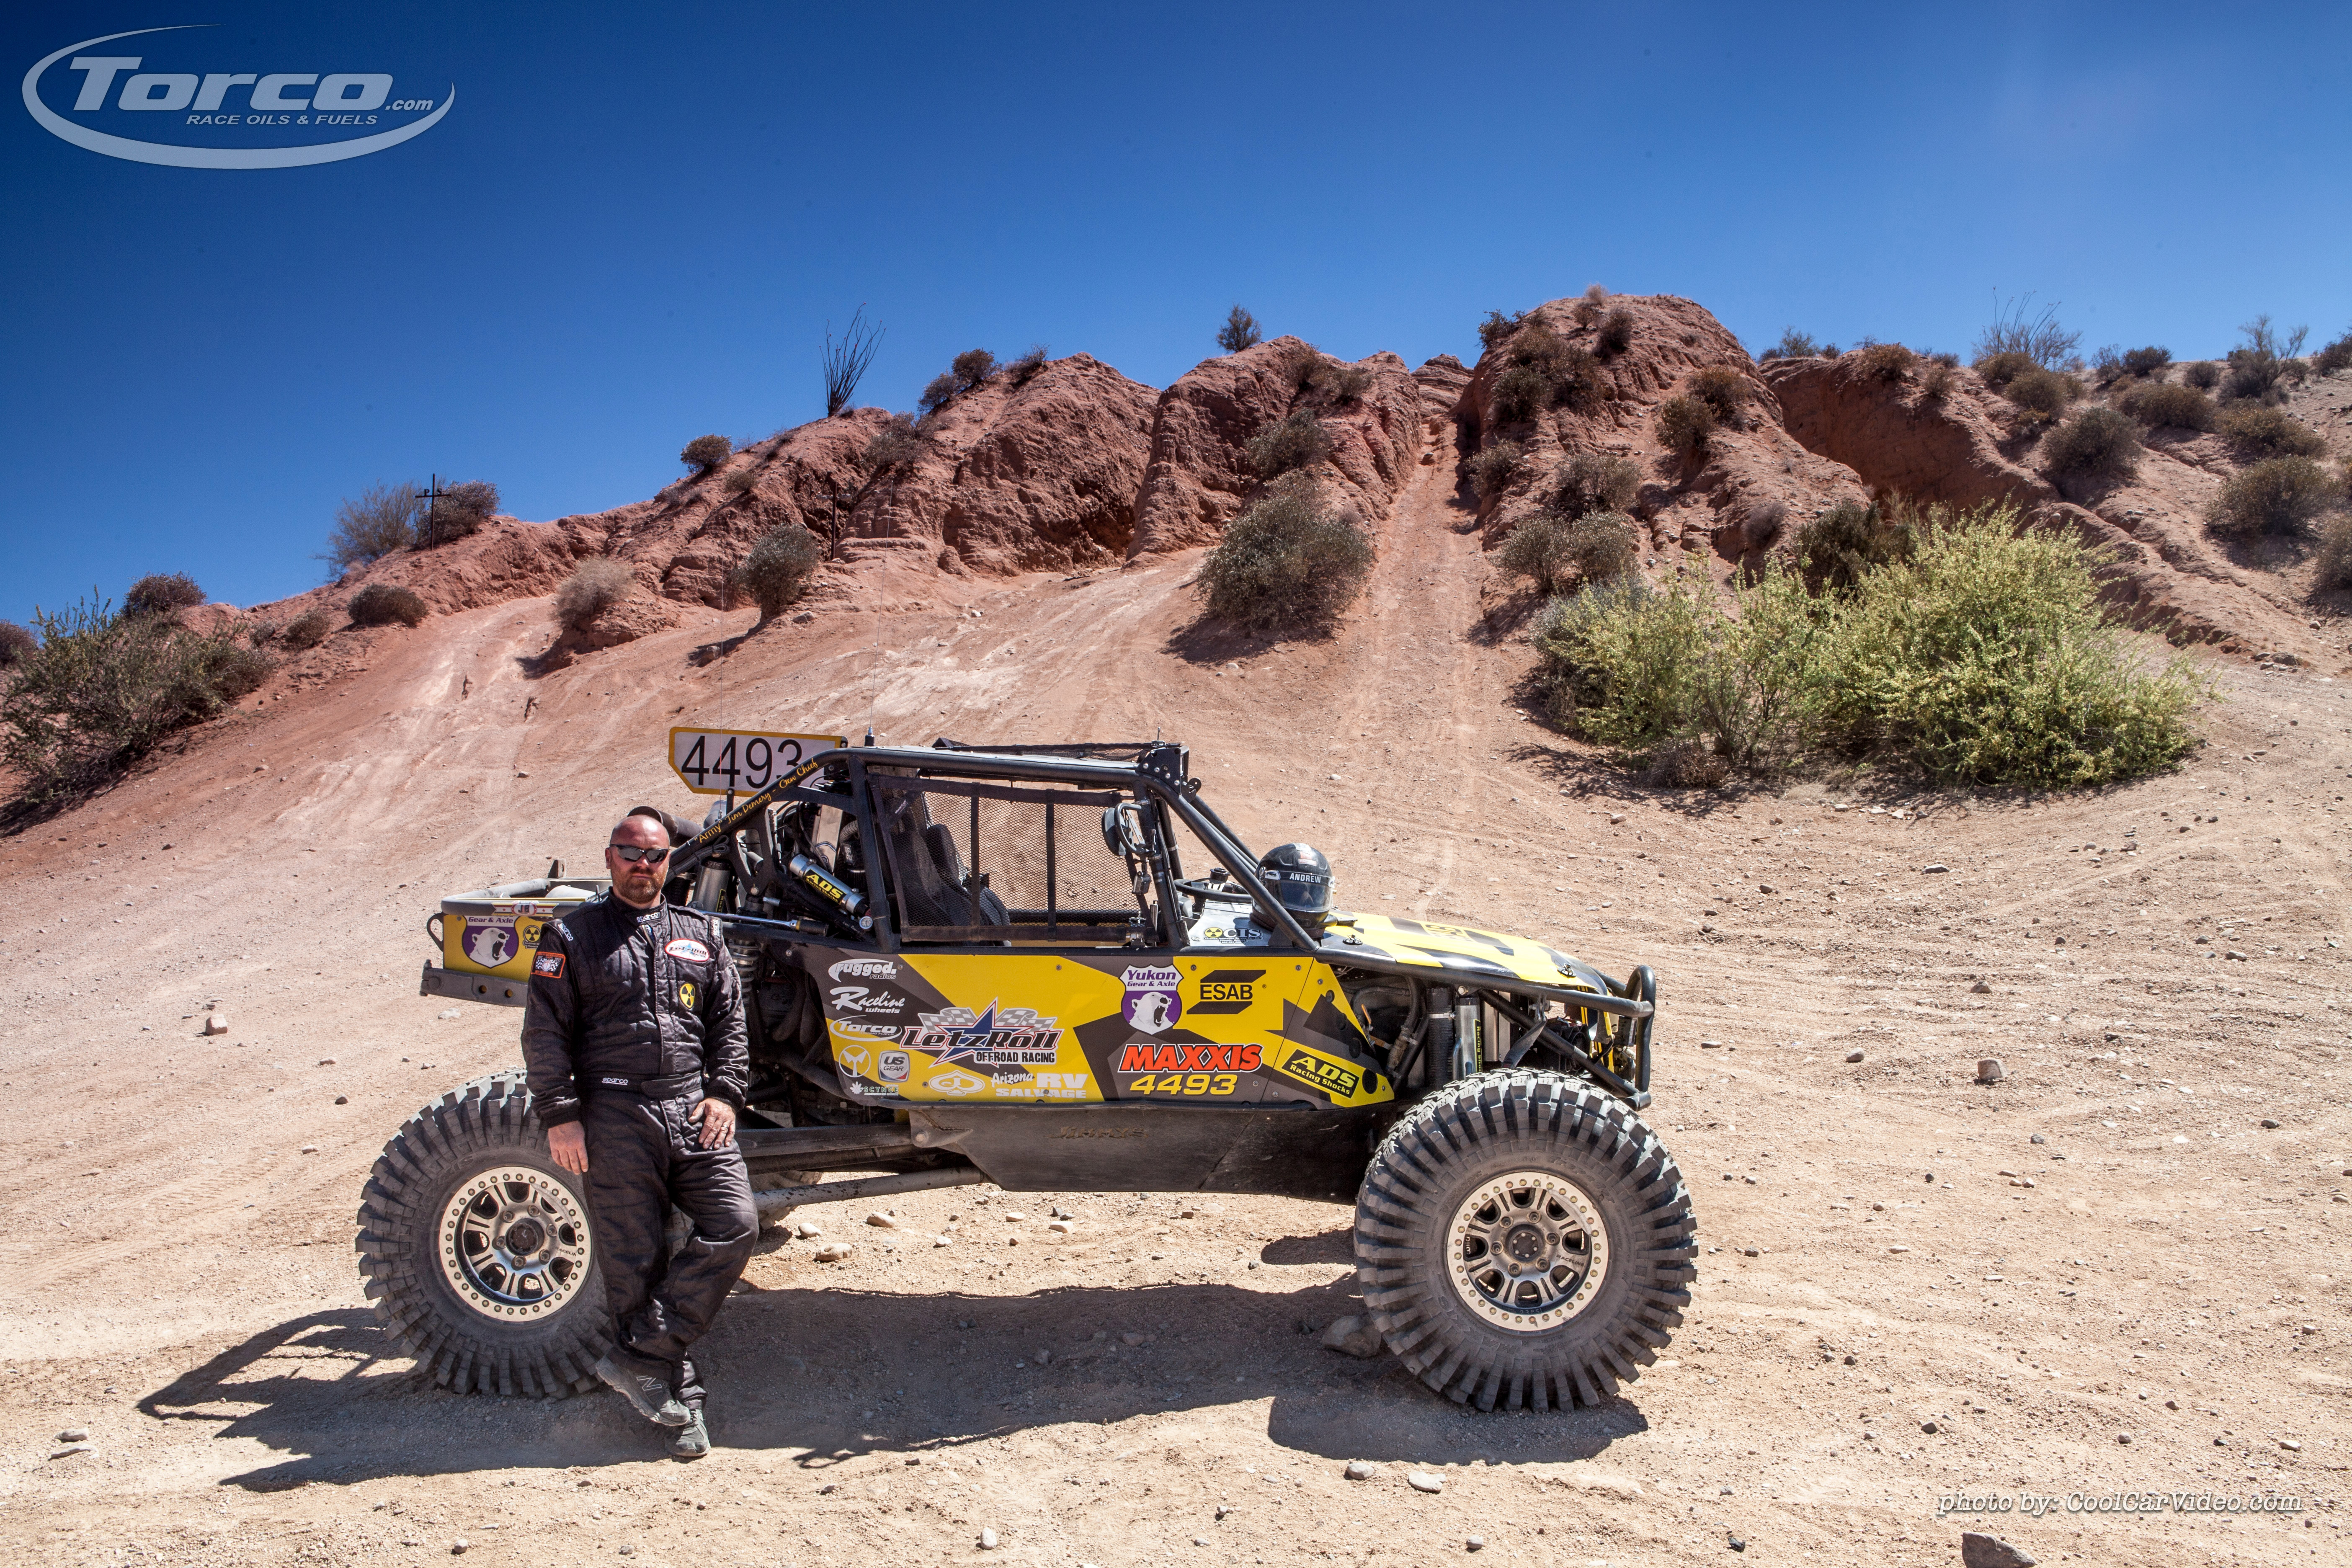 LetzRoll Offroad Racing – Torco Race Fuels